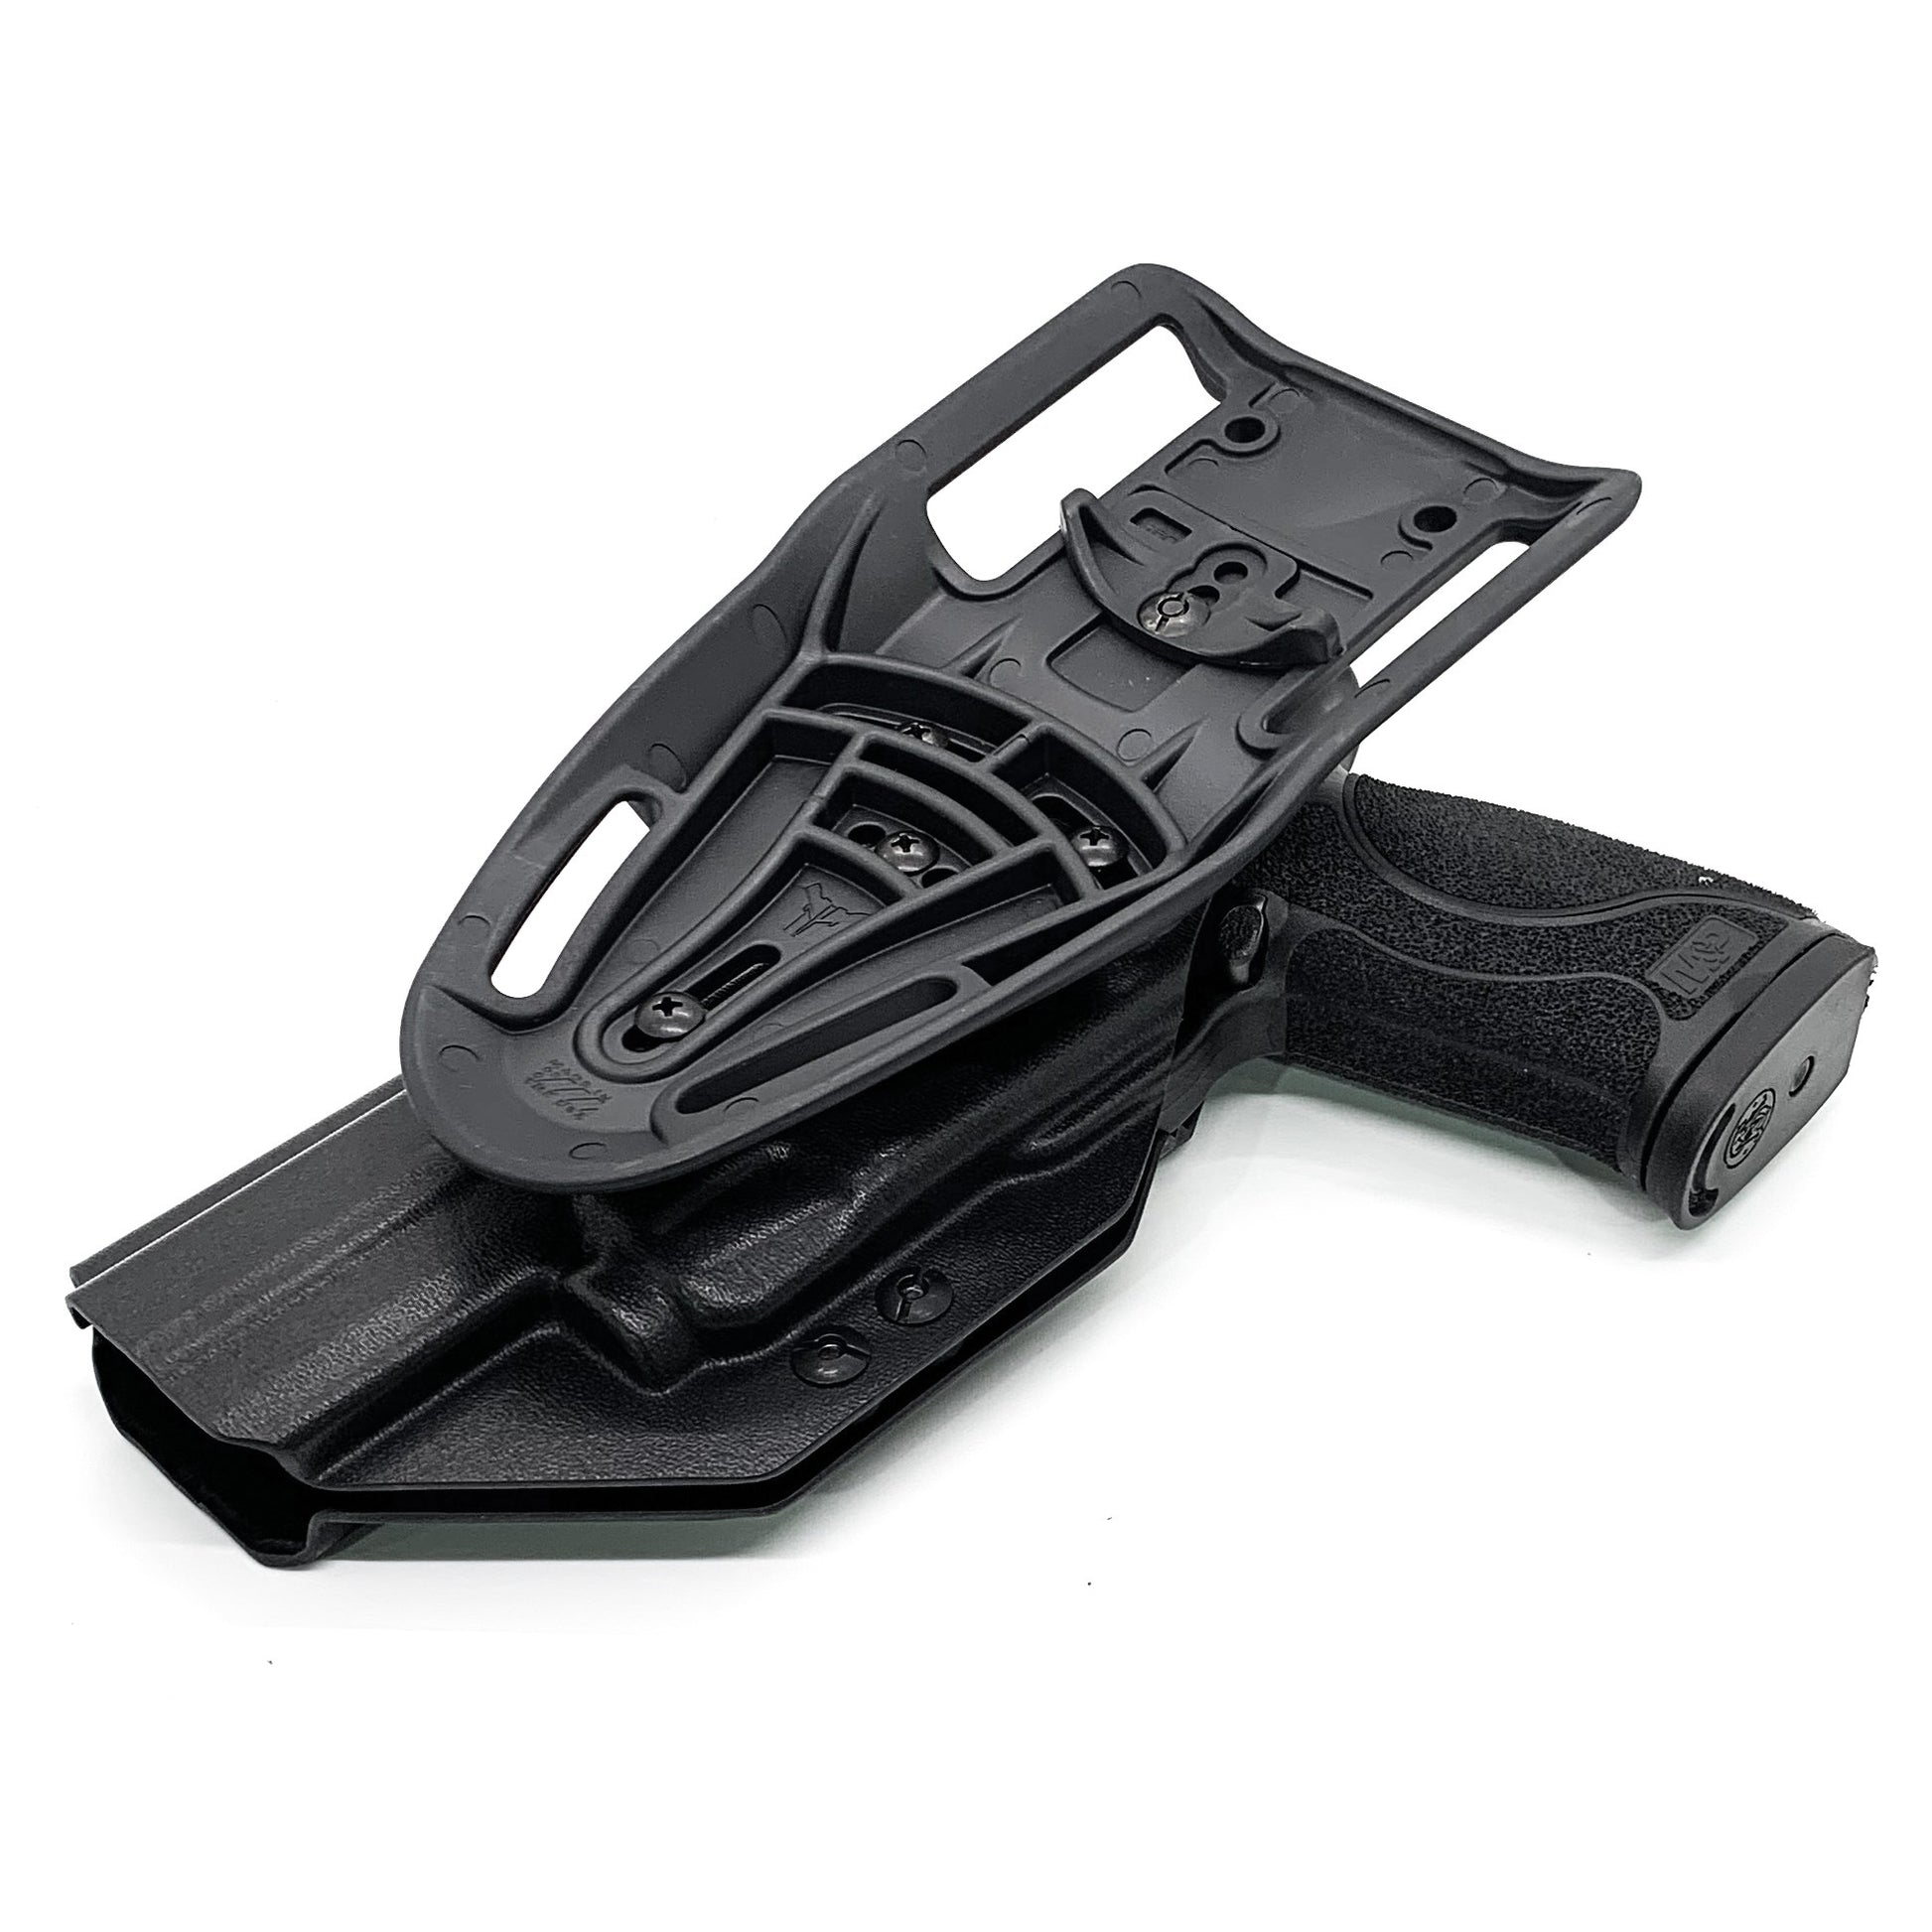 For the best Outside Waistband OWB Kydex Duty & Competition Holster for the Smith and Wesson M&P 5.6" 10MM M2.0 pistol with thumb safety and the Streamlight TLR-7X, TLR-7 X, & TLR-7 A, shop Four Brothers 4BROS Holsters. Full sweat guard, adjustable retention, cleared for red dot sights. Made in the USA.